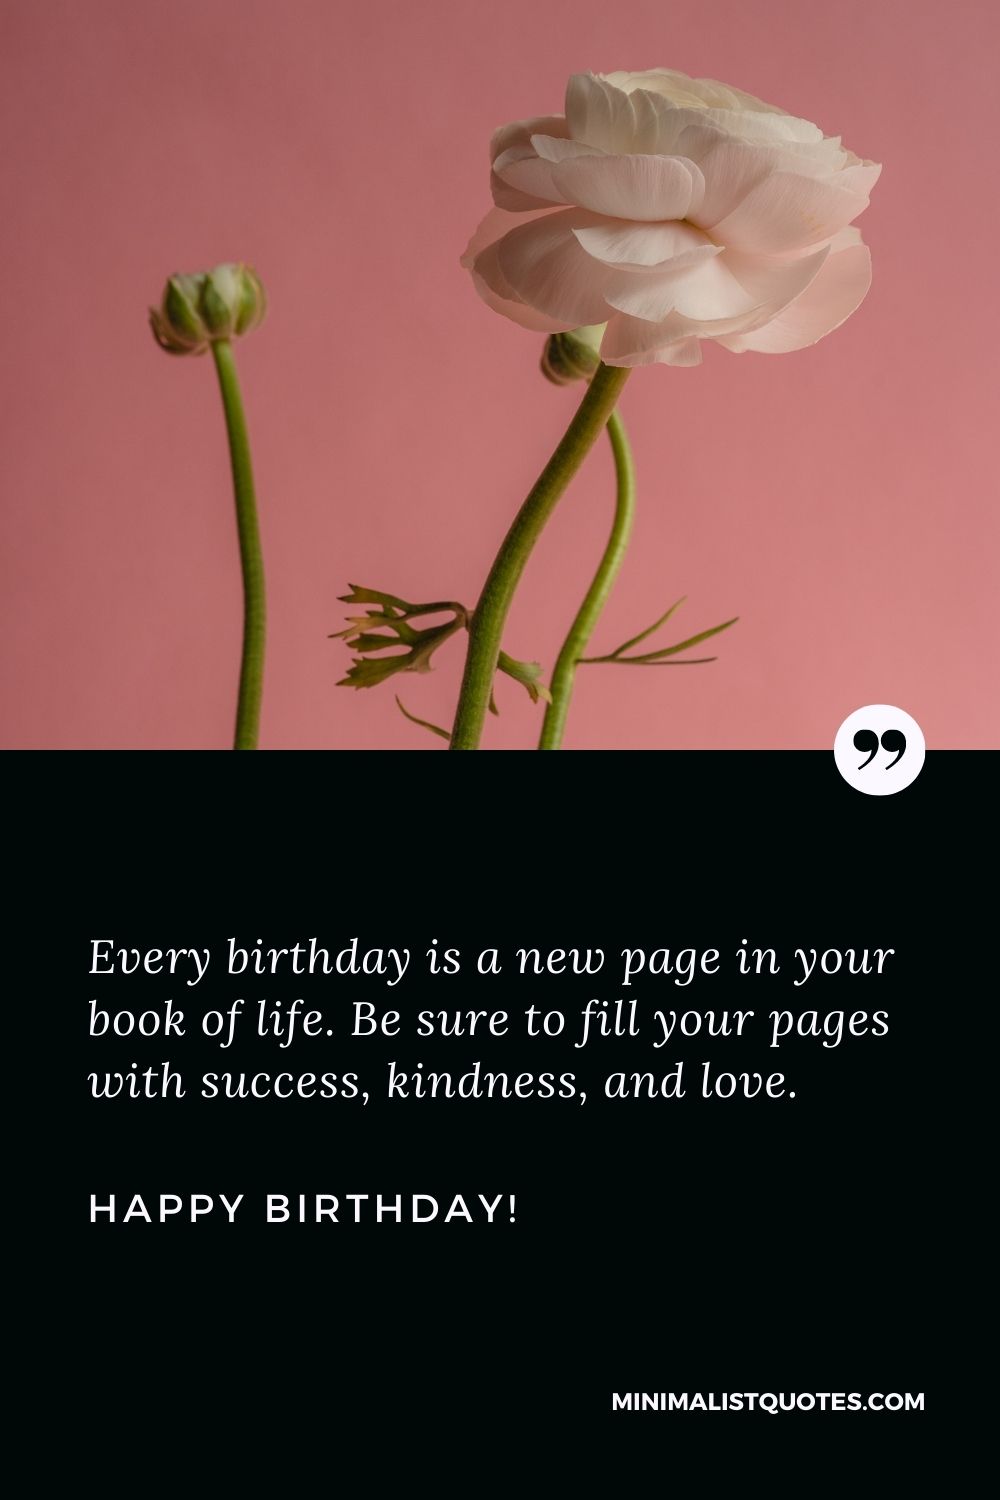 105 Short & Simple Birthday Wishes for the Minimalist in You - YourFates